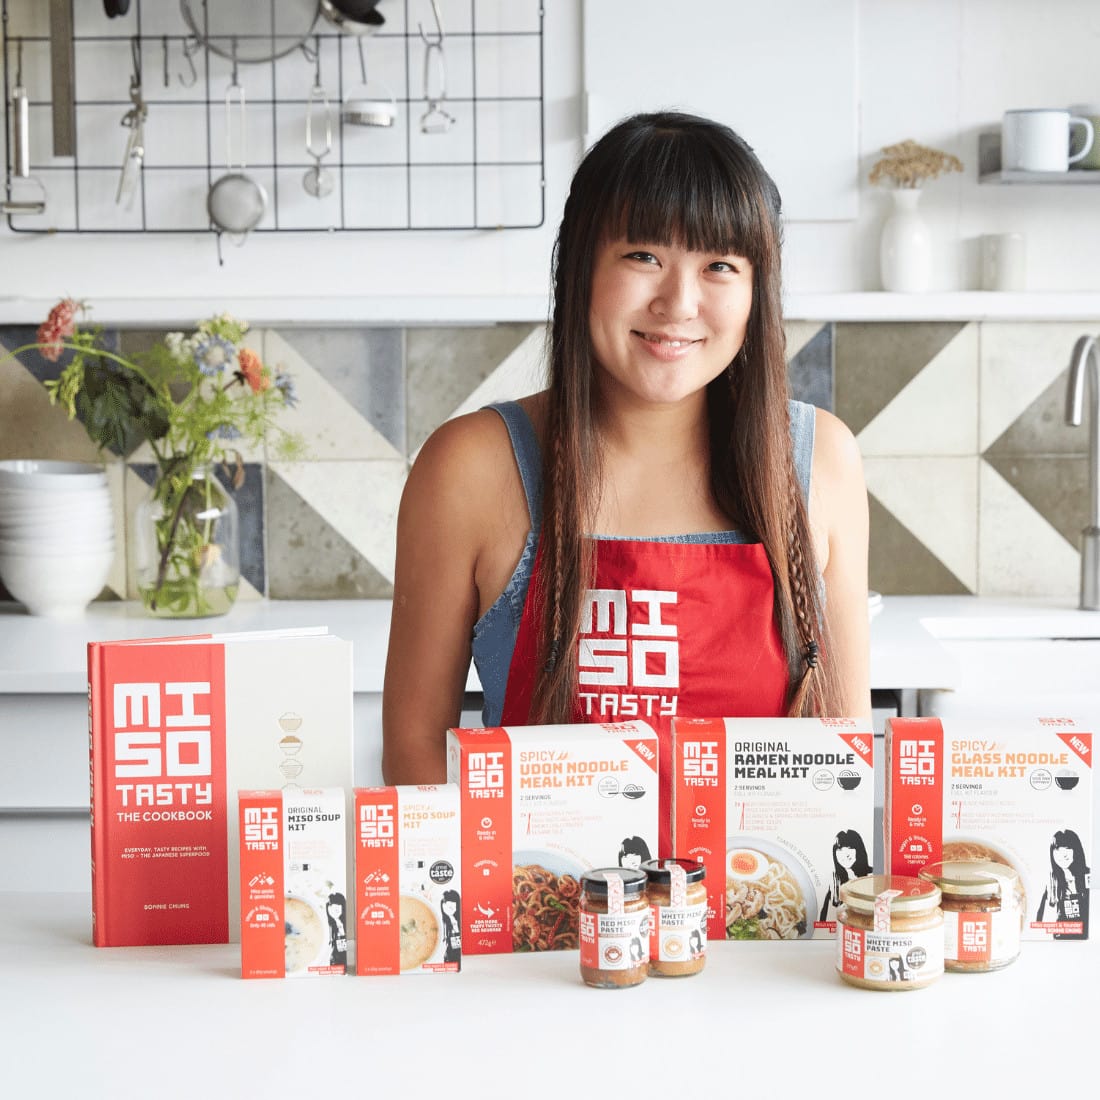 Bonnie Chung, founder of Miso Tasty, in her kitchen with her range of products on the counter in front of her